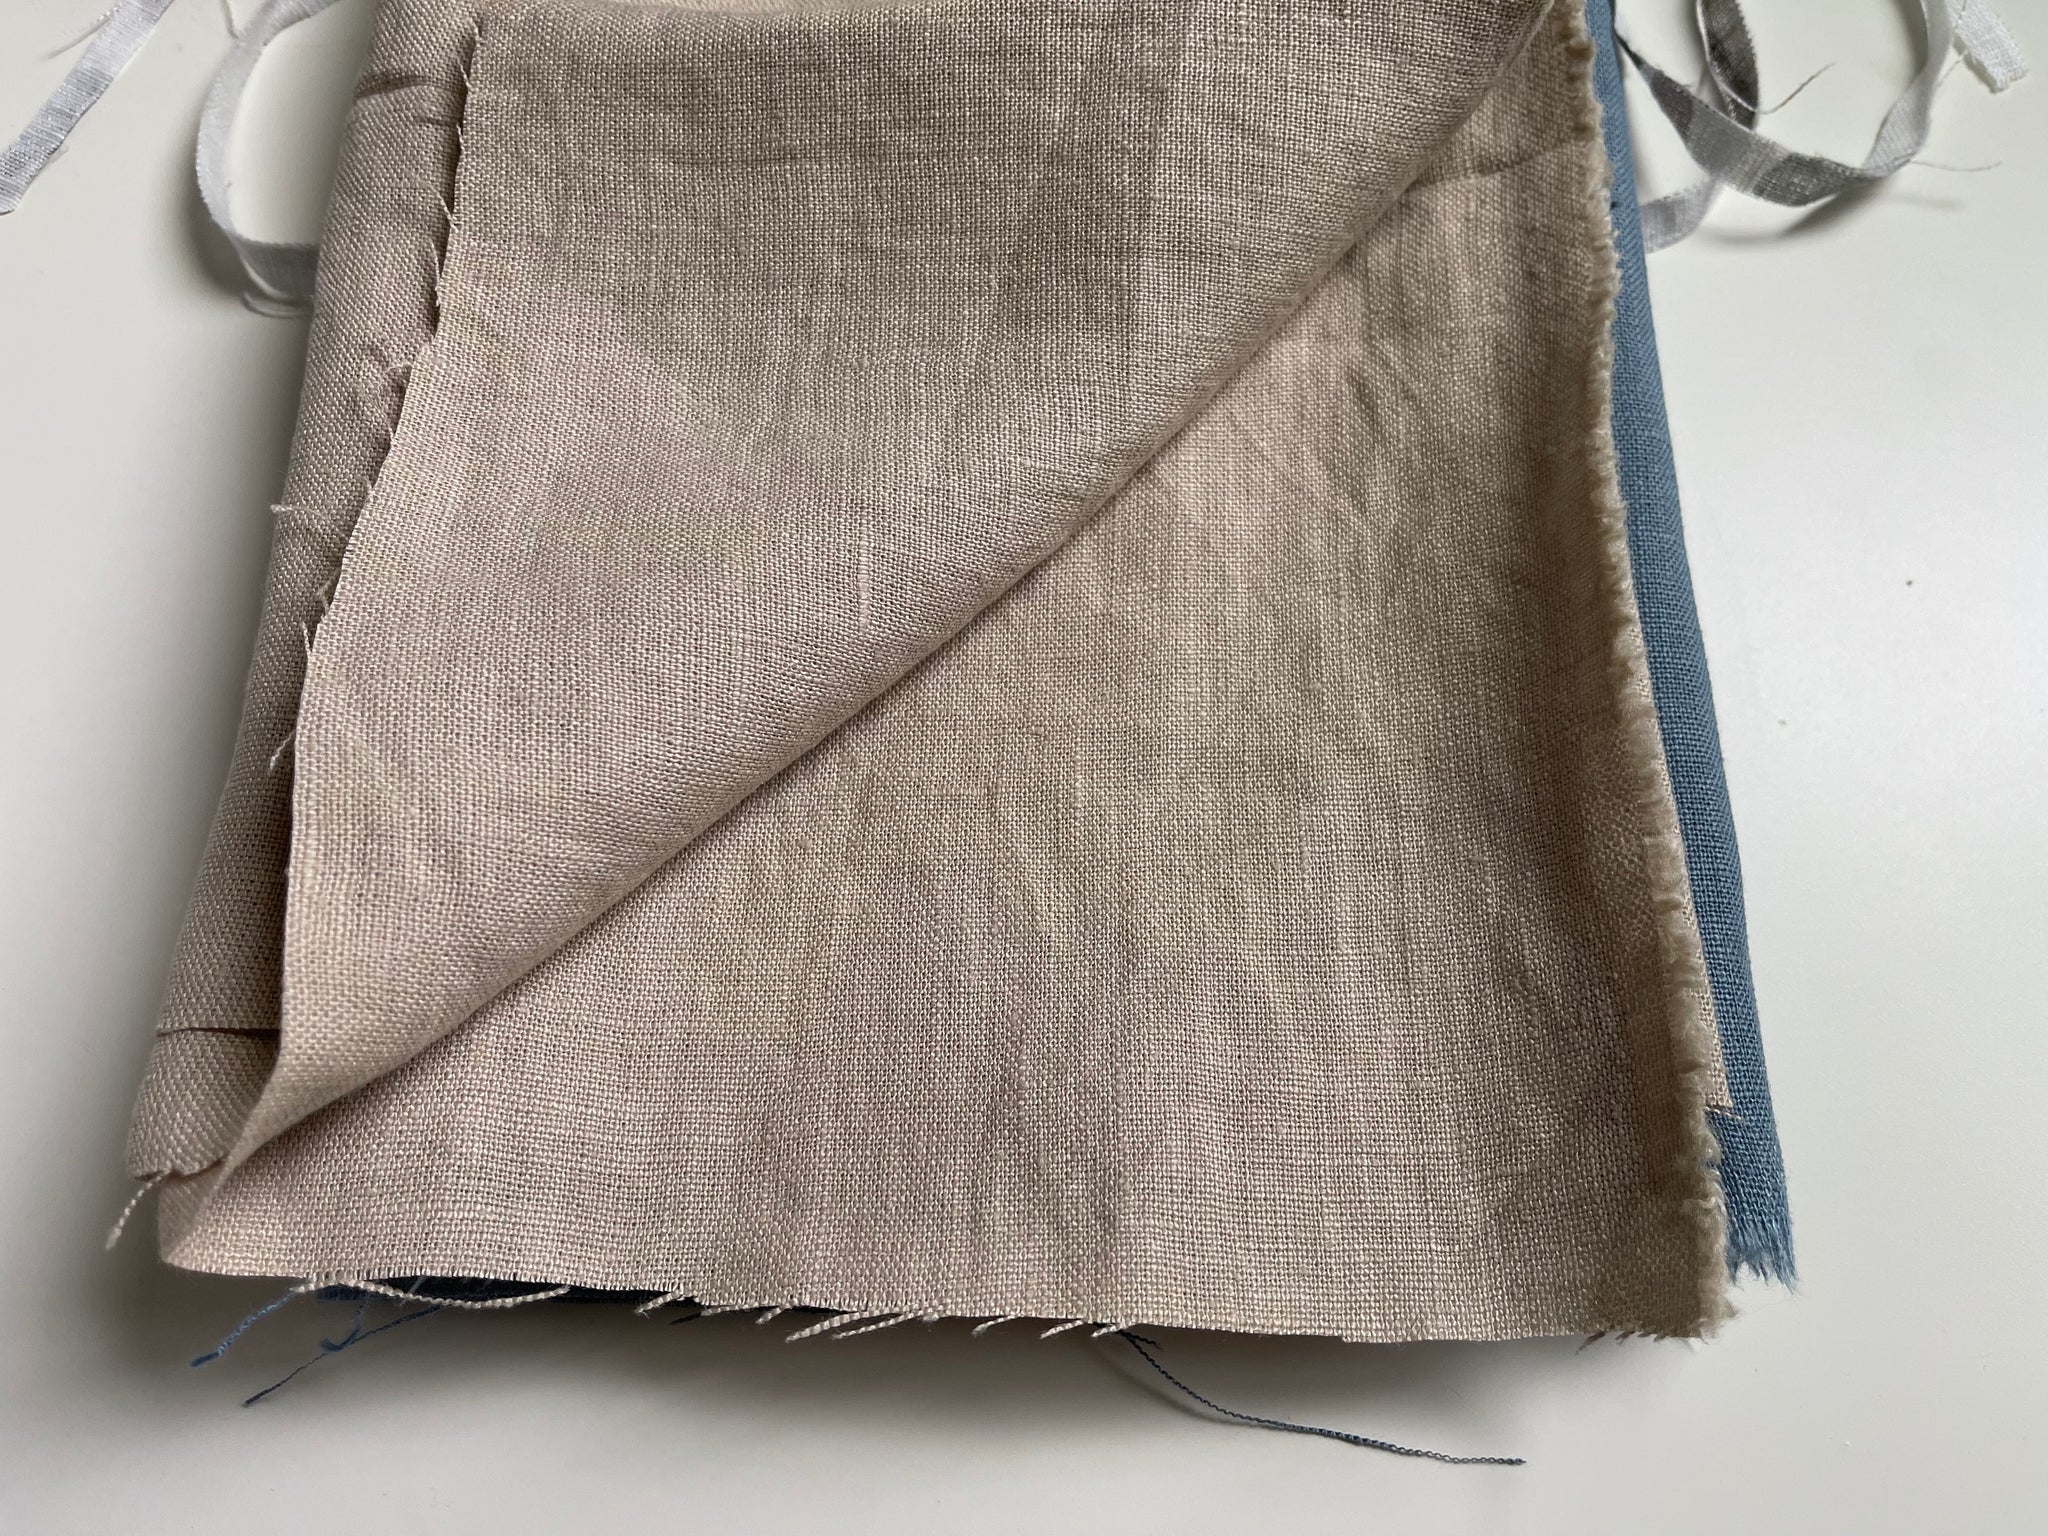 Linen Fabric Remnants - Oatmeal and Spring Lake